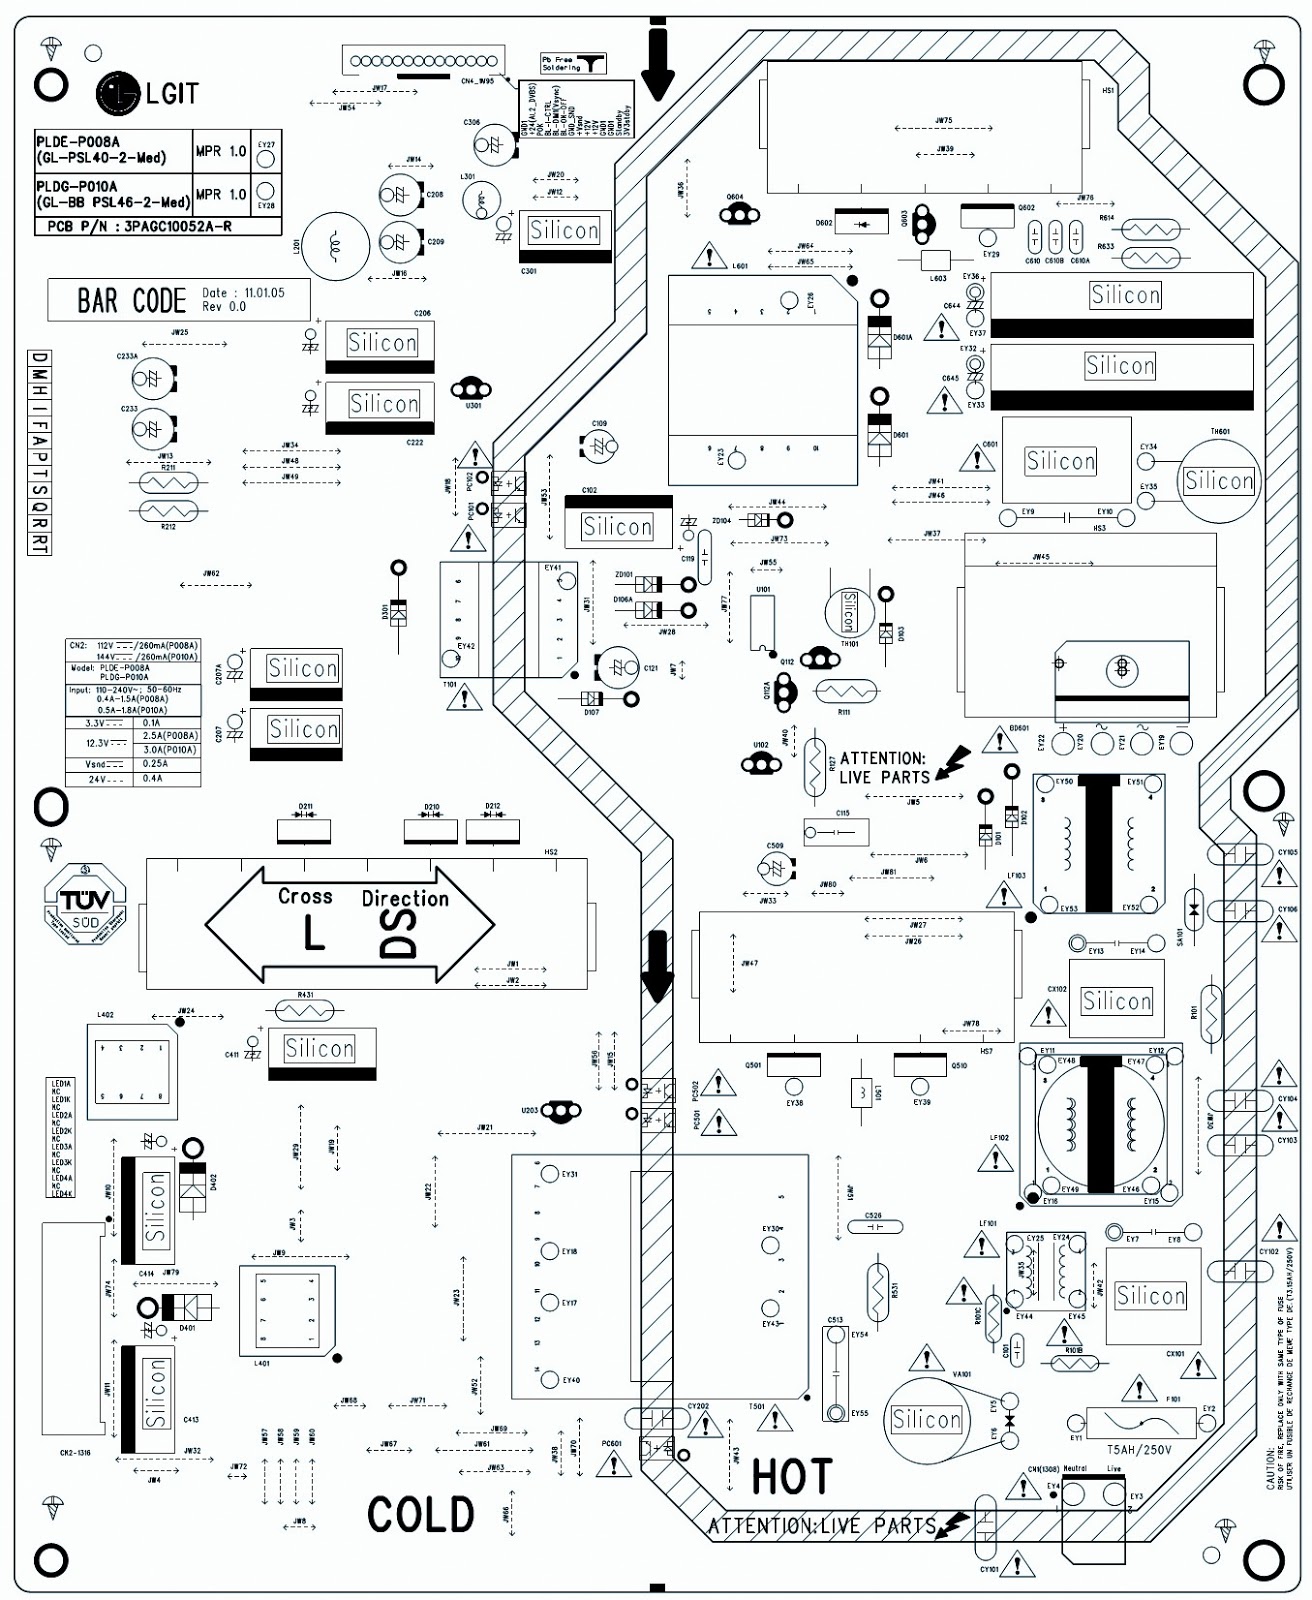 Schematic Diagrams: LG PLDE-P008A - SMPS Power Supply Unit with